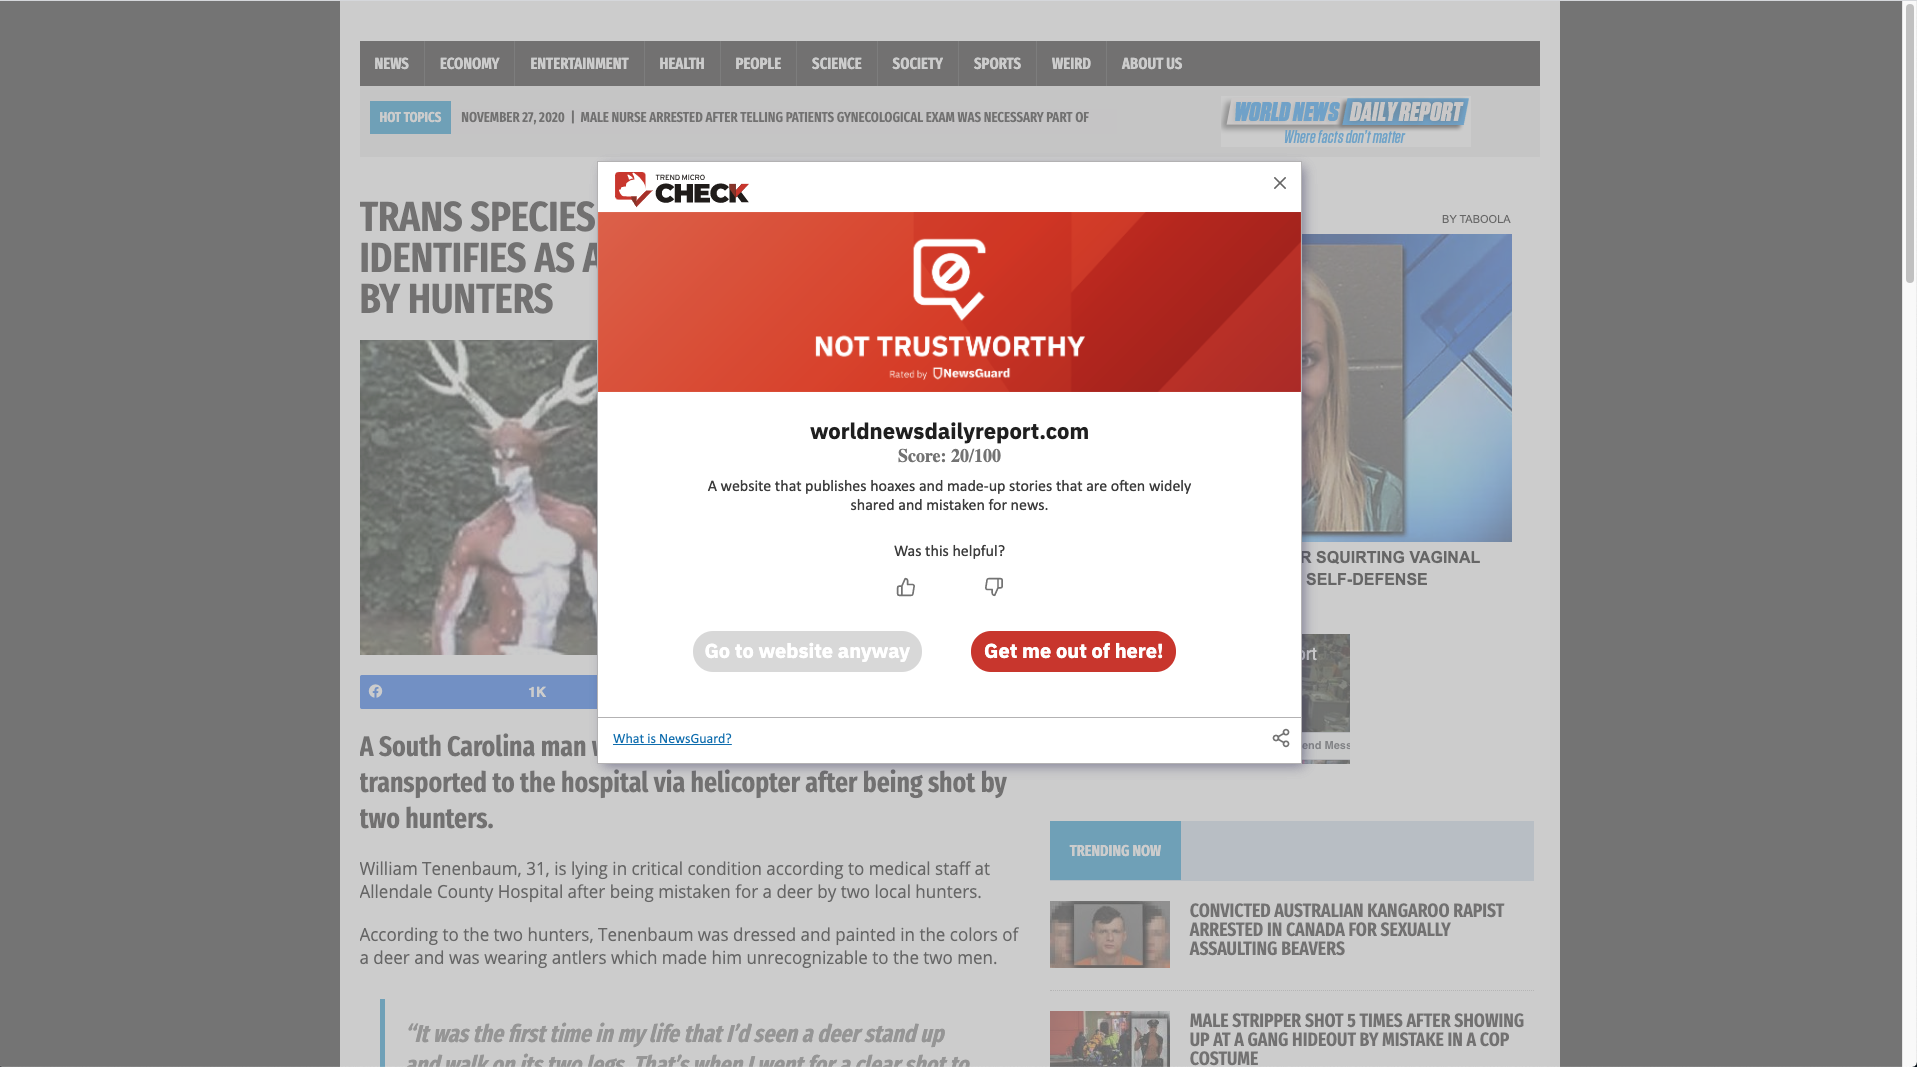 Trend Micro Check will block NOT TRUSTWORTHY news sites first for users.